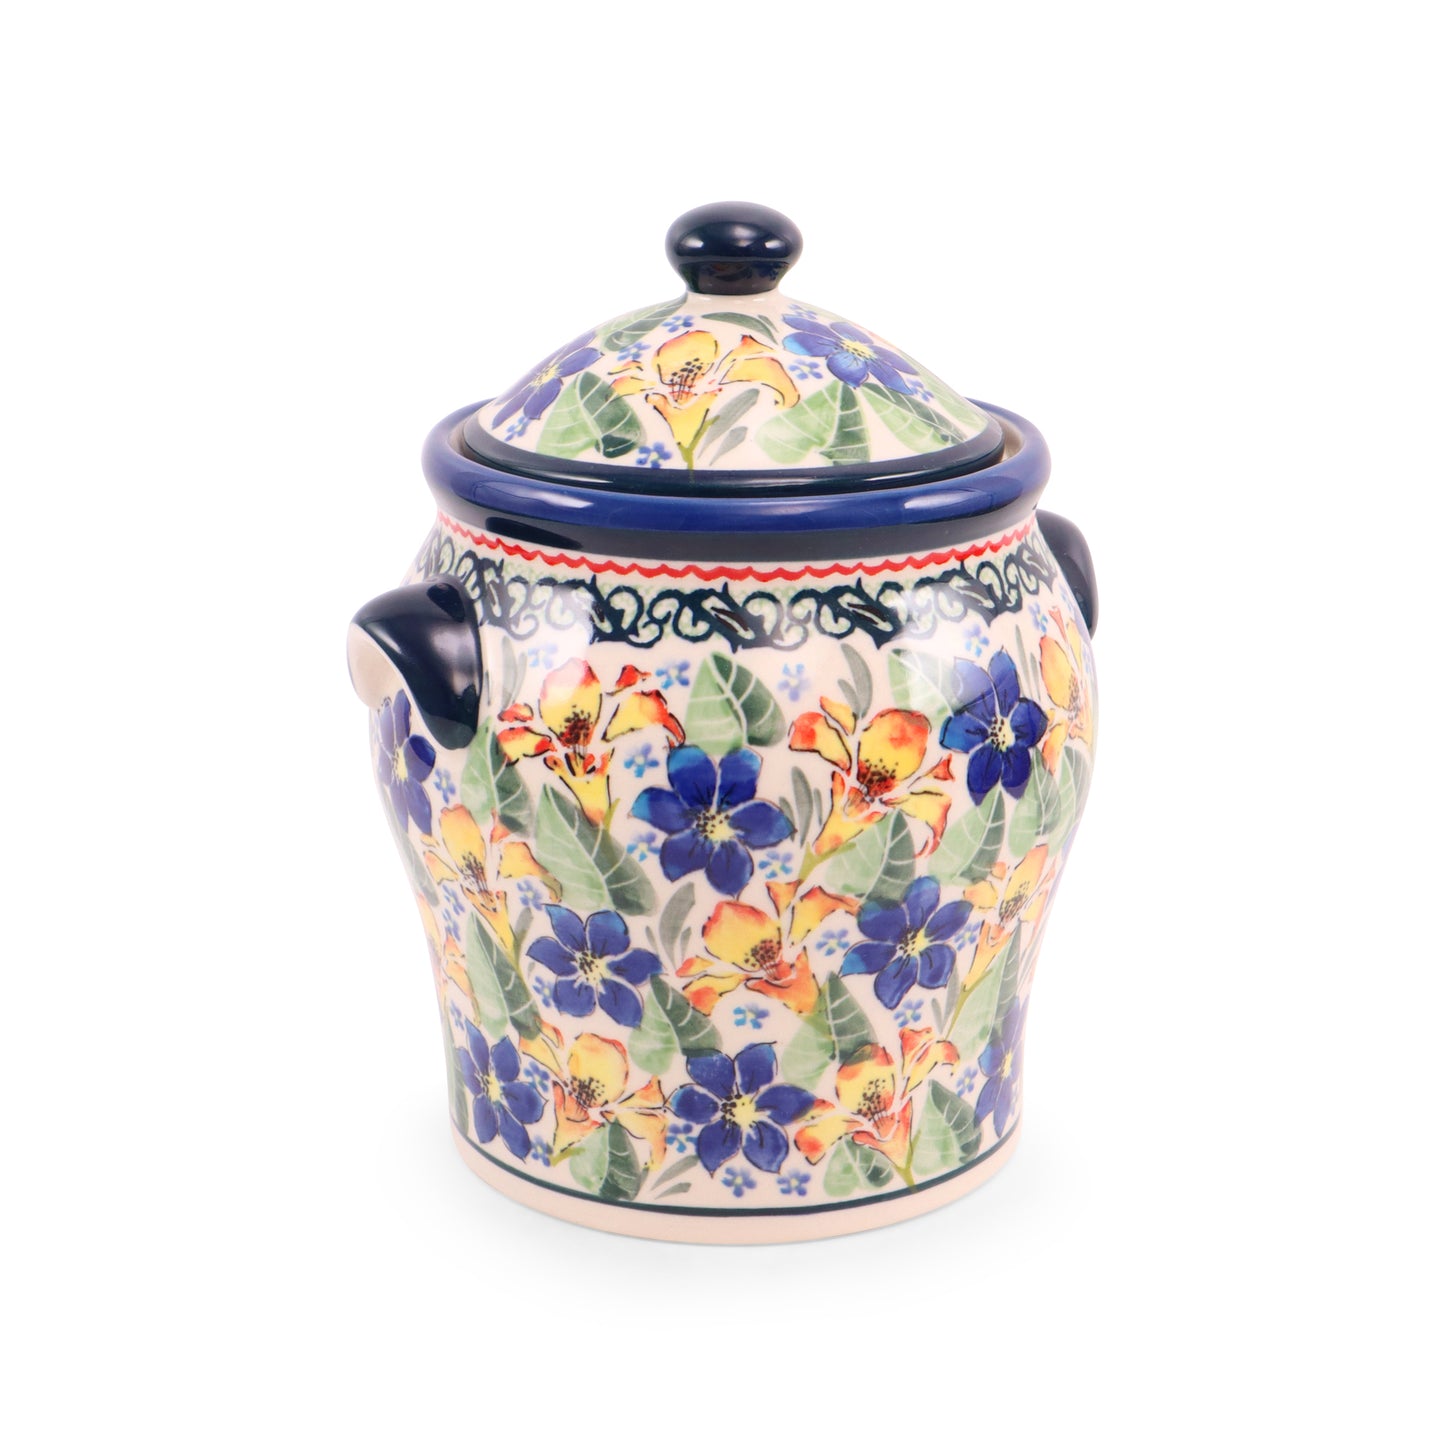 1.5L Canister with Lid. Pattern: Botanical Garden